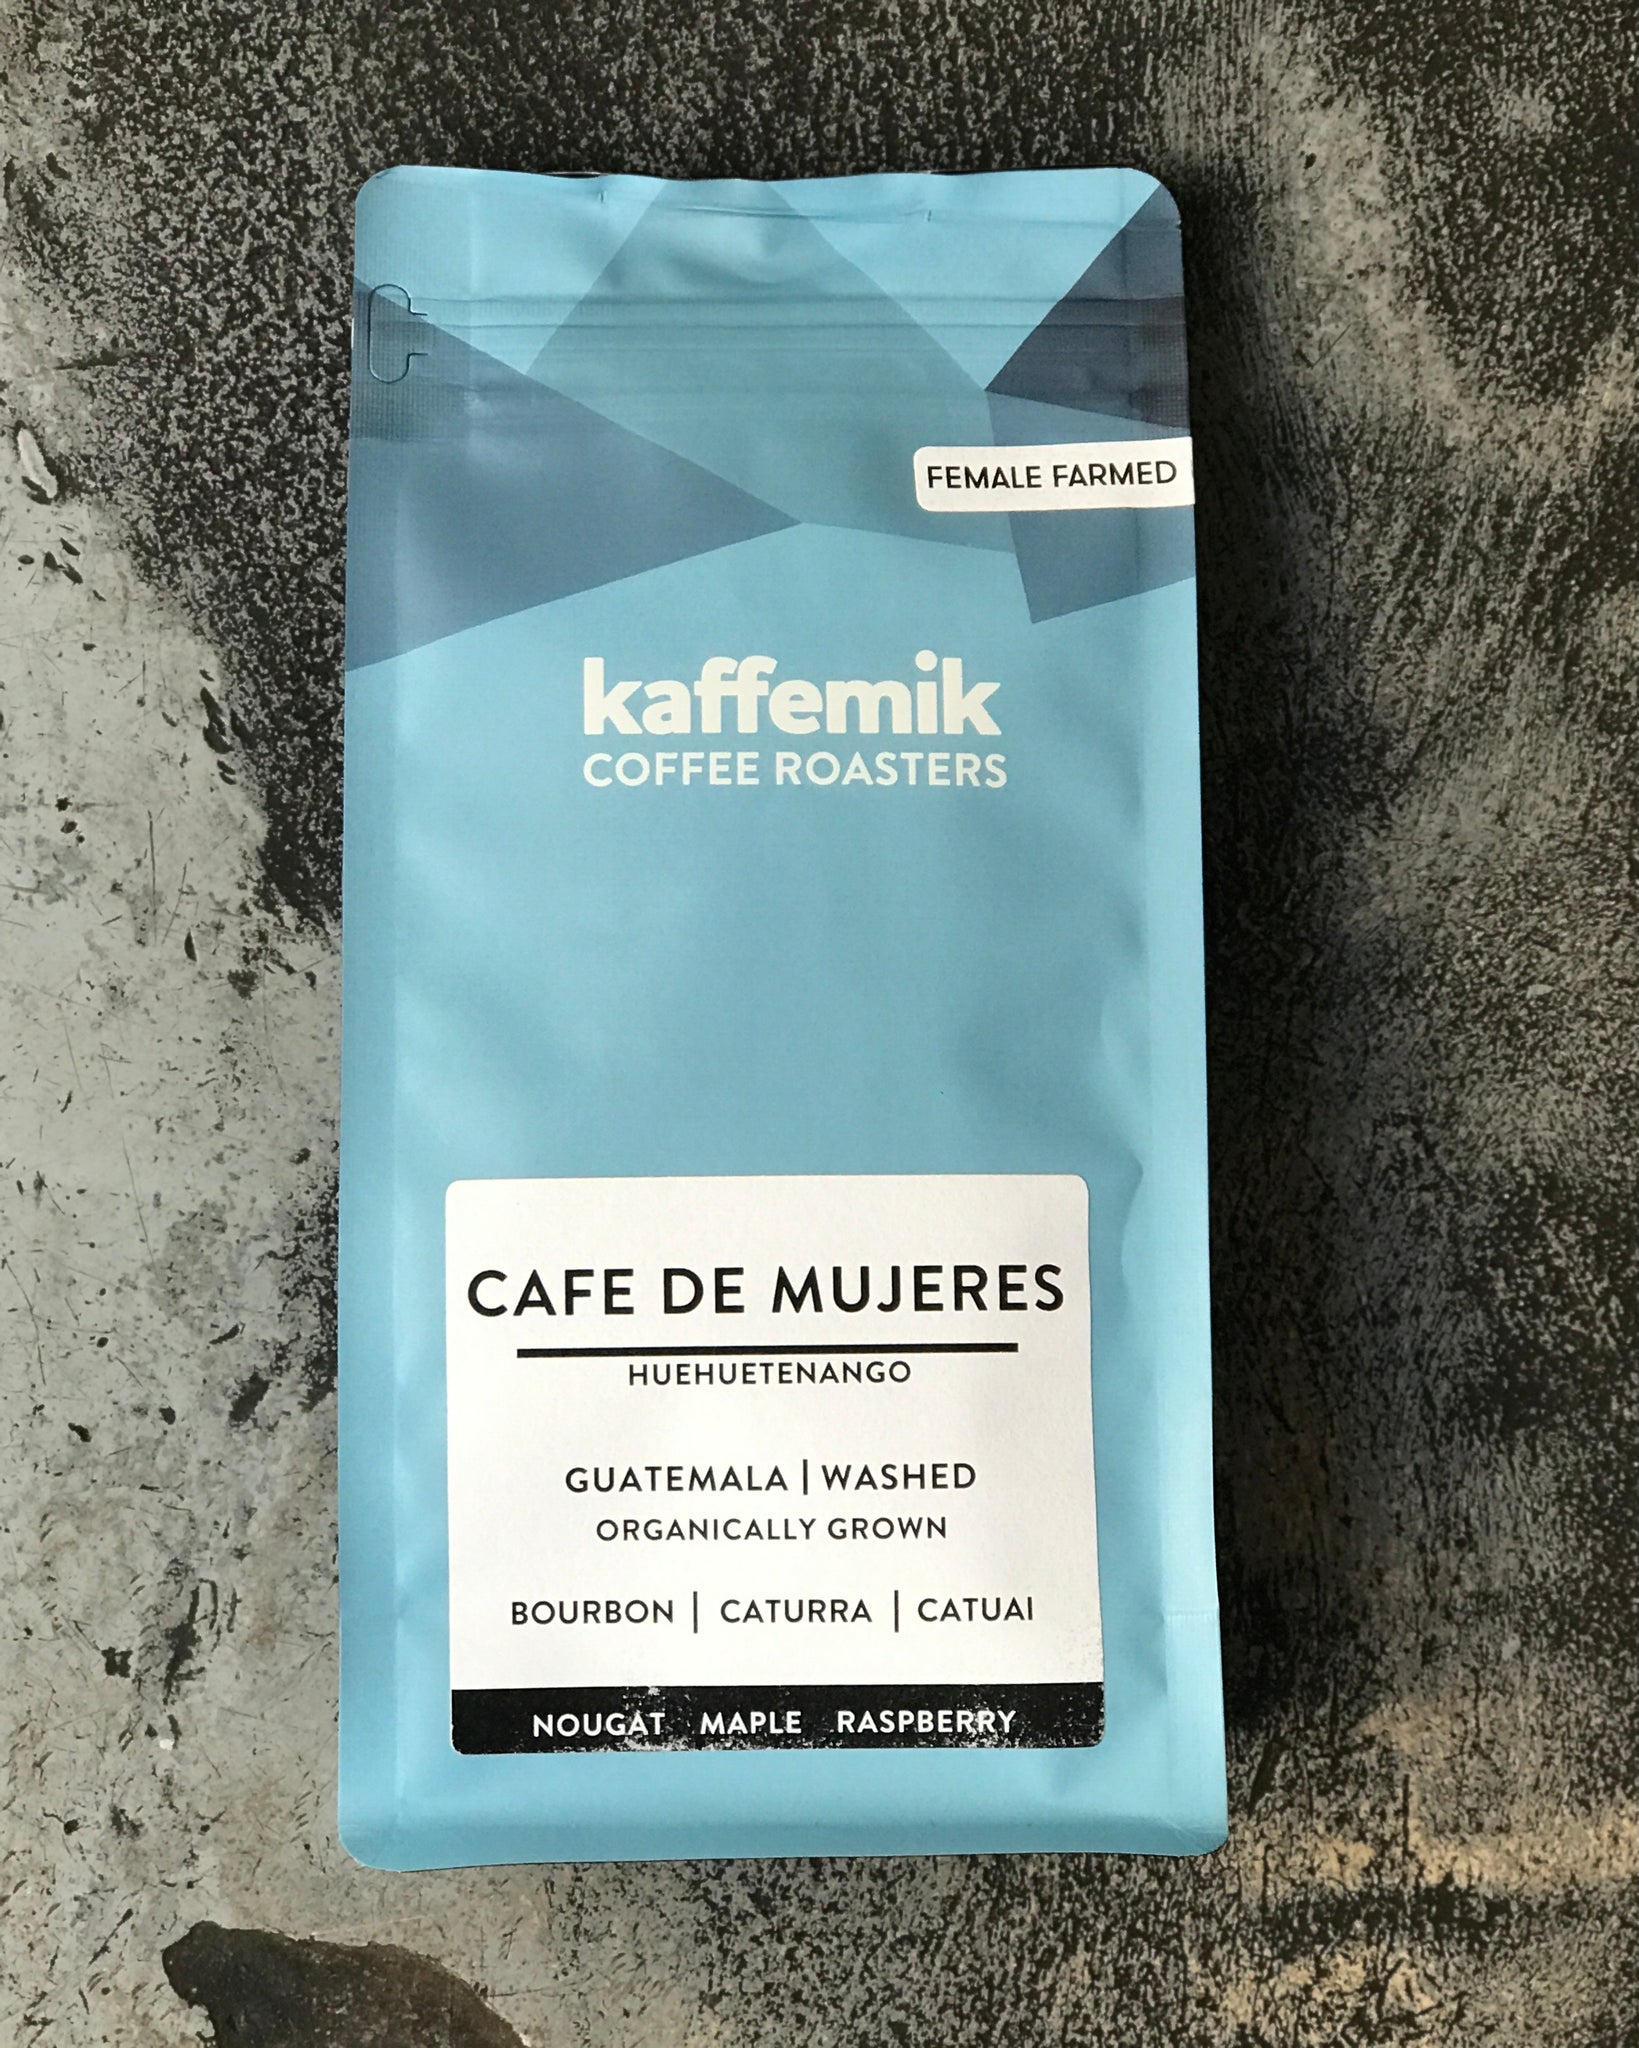 CAFE DE MUJERES | Guatemala | washed [organically grown - female farmed]